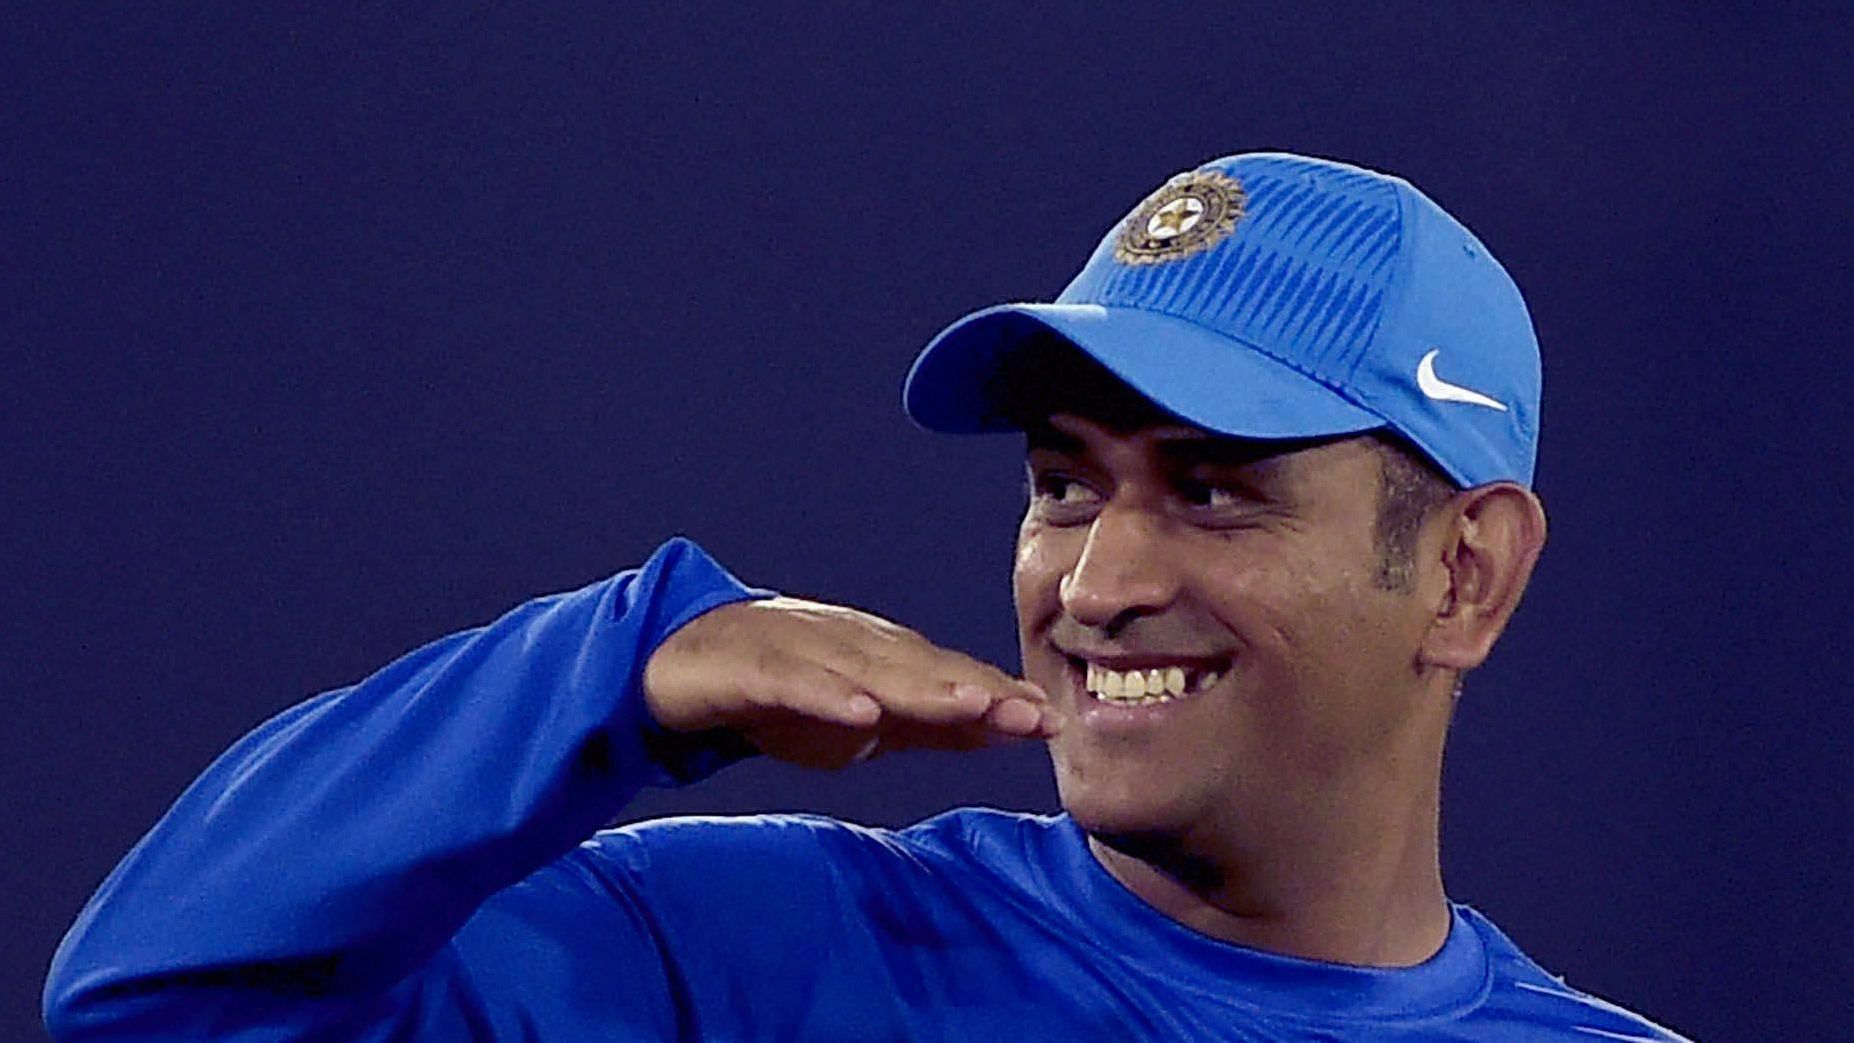 In the ongoing edition of the Indian Premier League, Dhoni has scored 314 runs in nine games at an average of over 100.